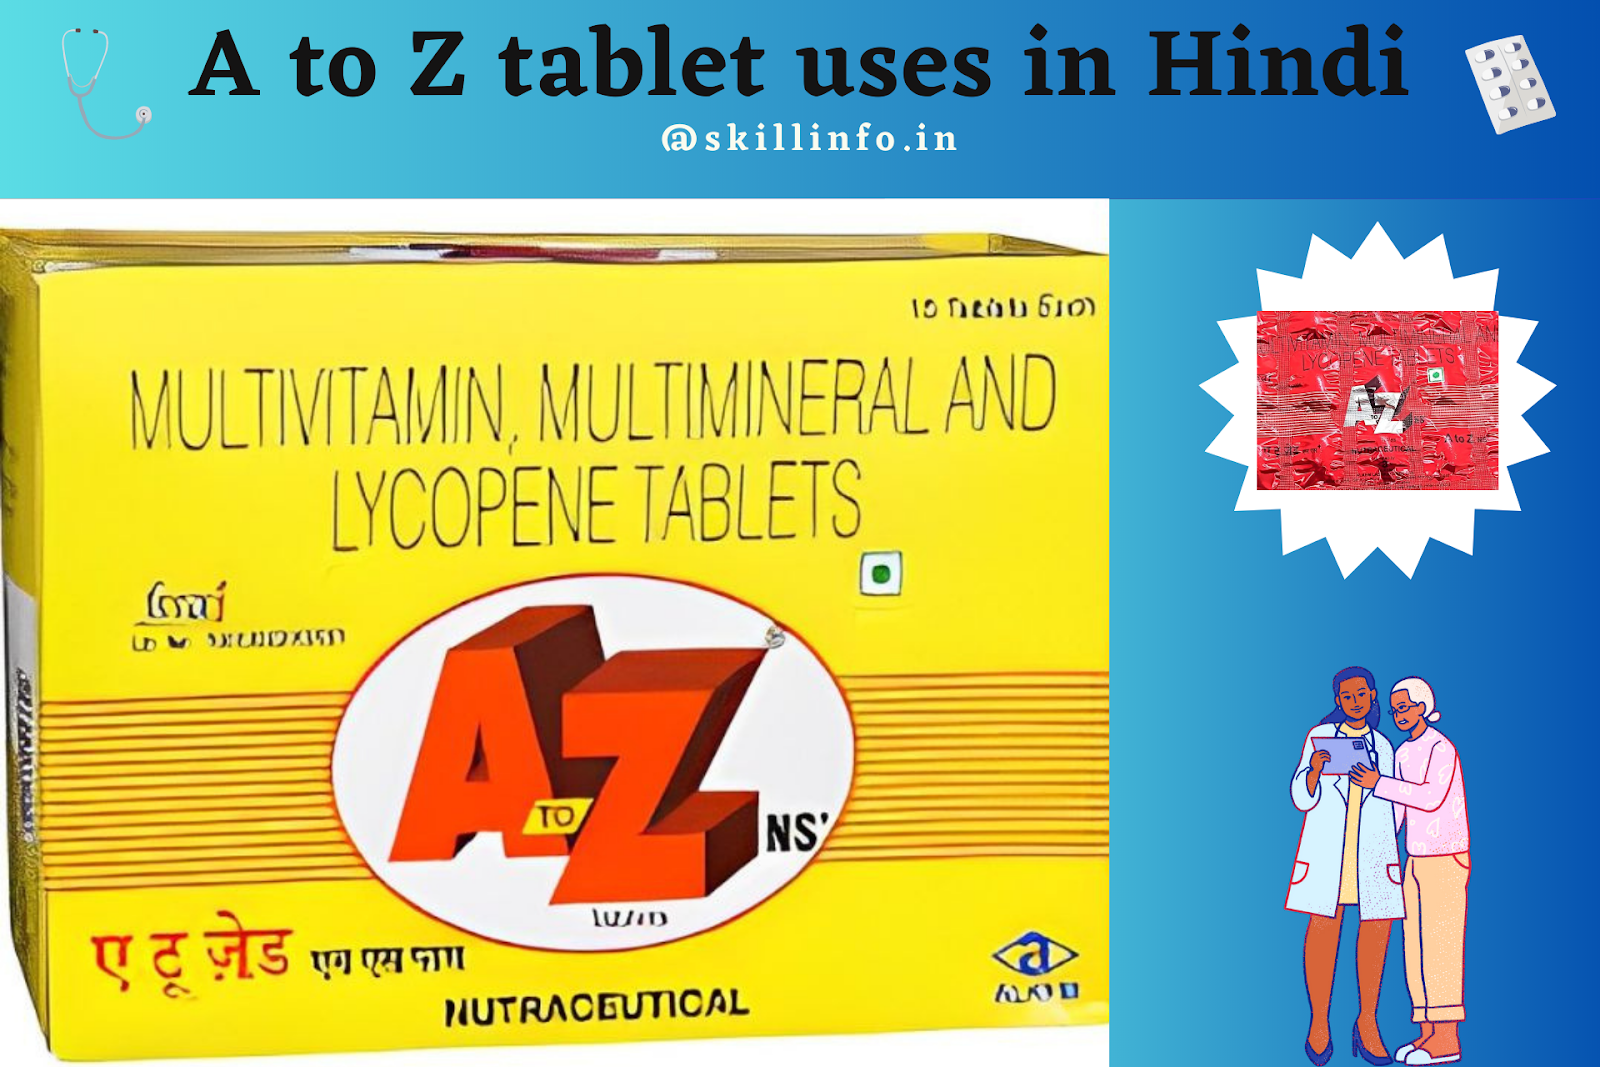 A to Z tablet uses in Hindi